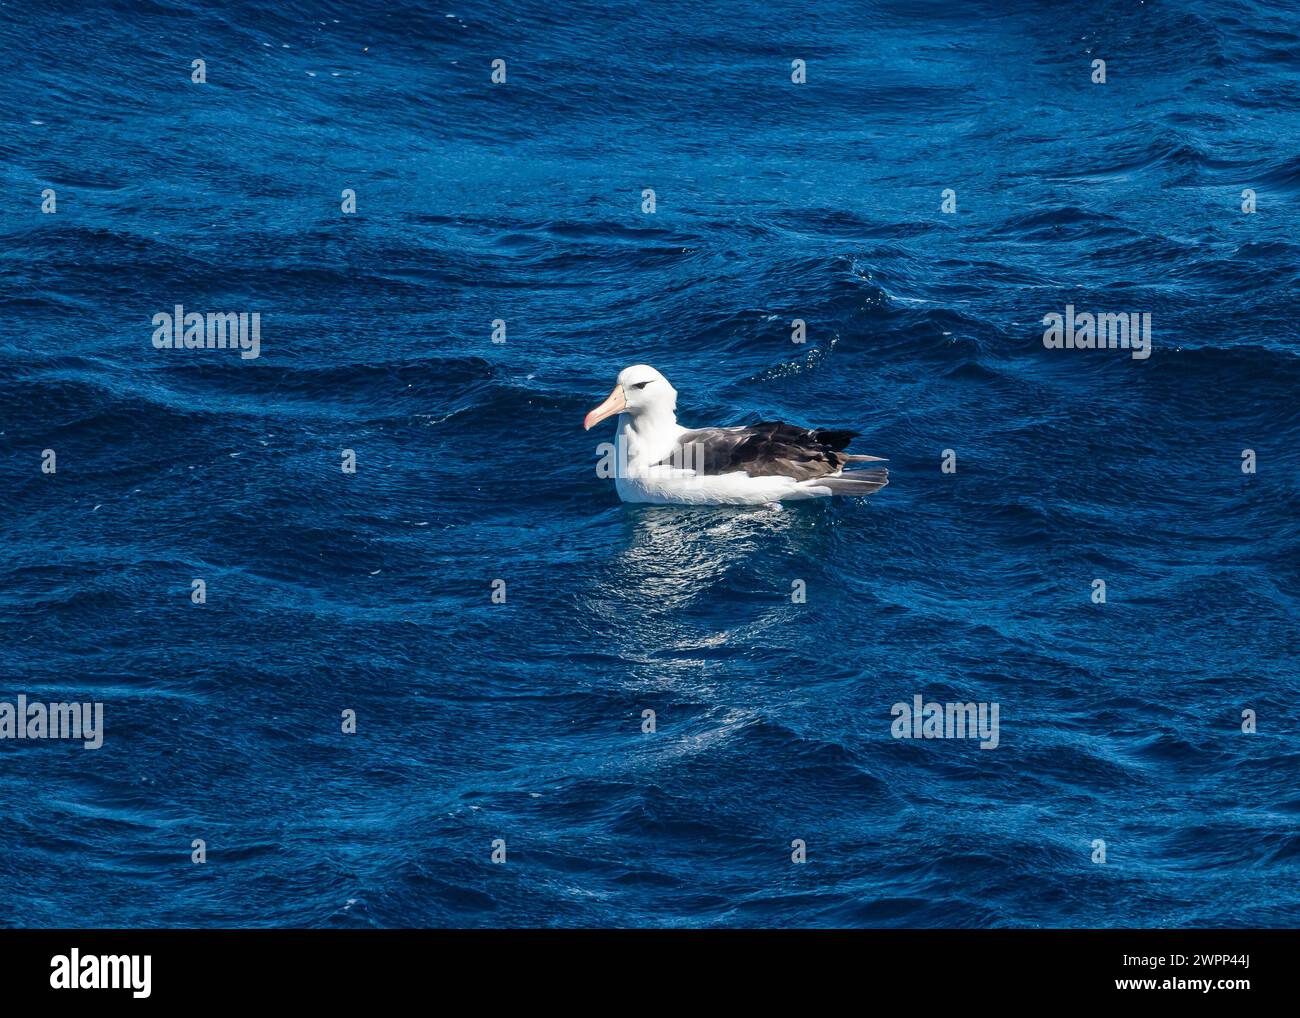 A Black-browed Albatross (Thalassarche melanophris) floating on ocean surface. Pacific Ocean, off the coast of Chile. Stock Photo